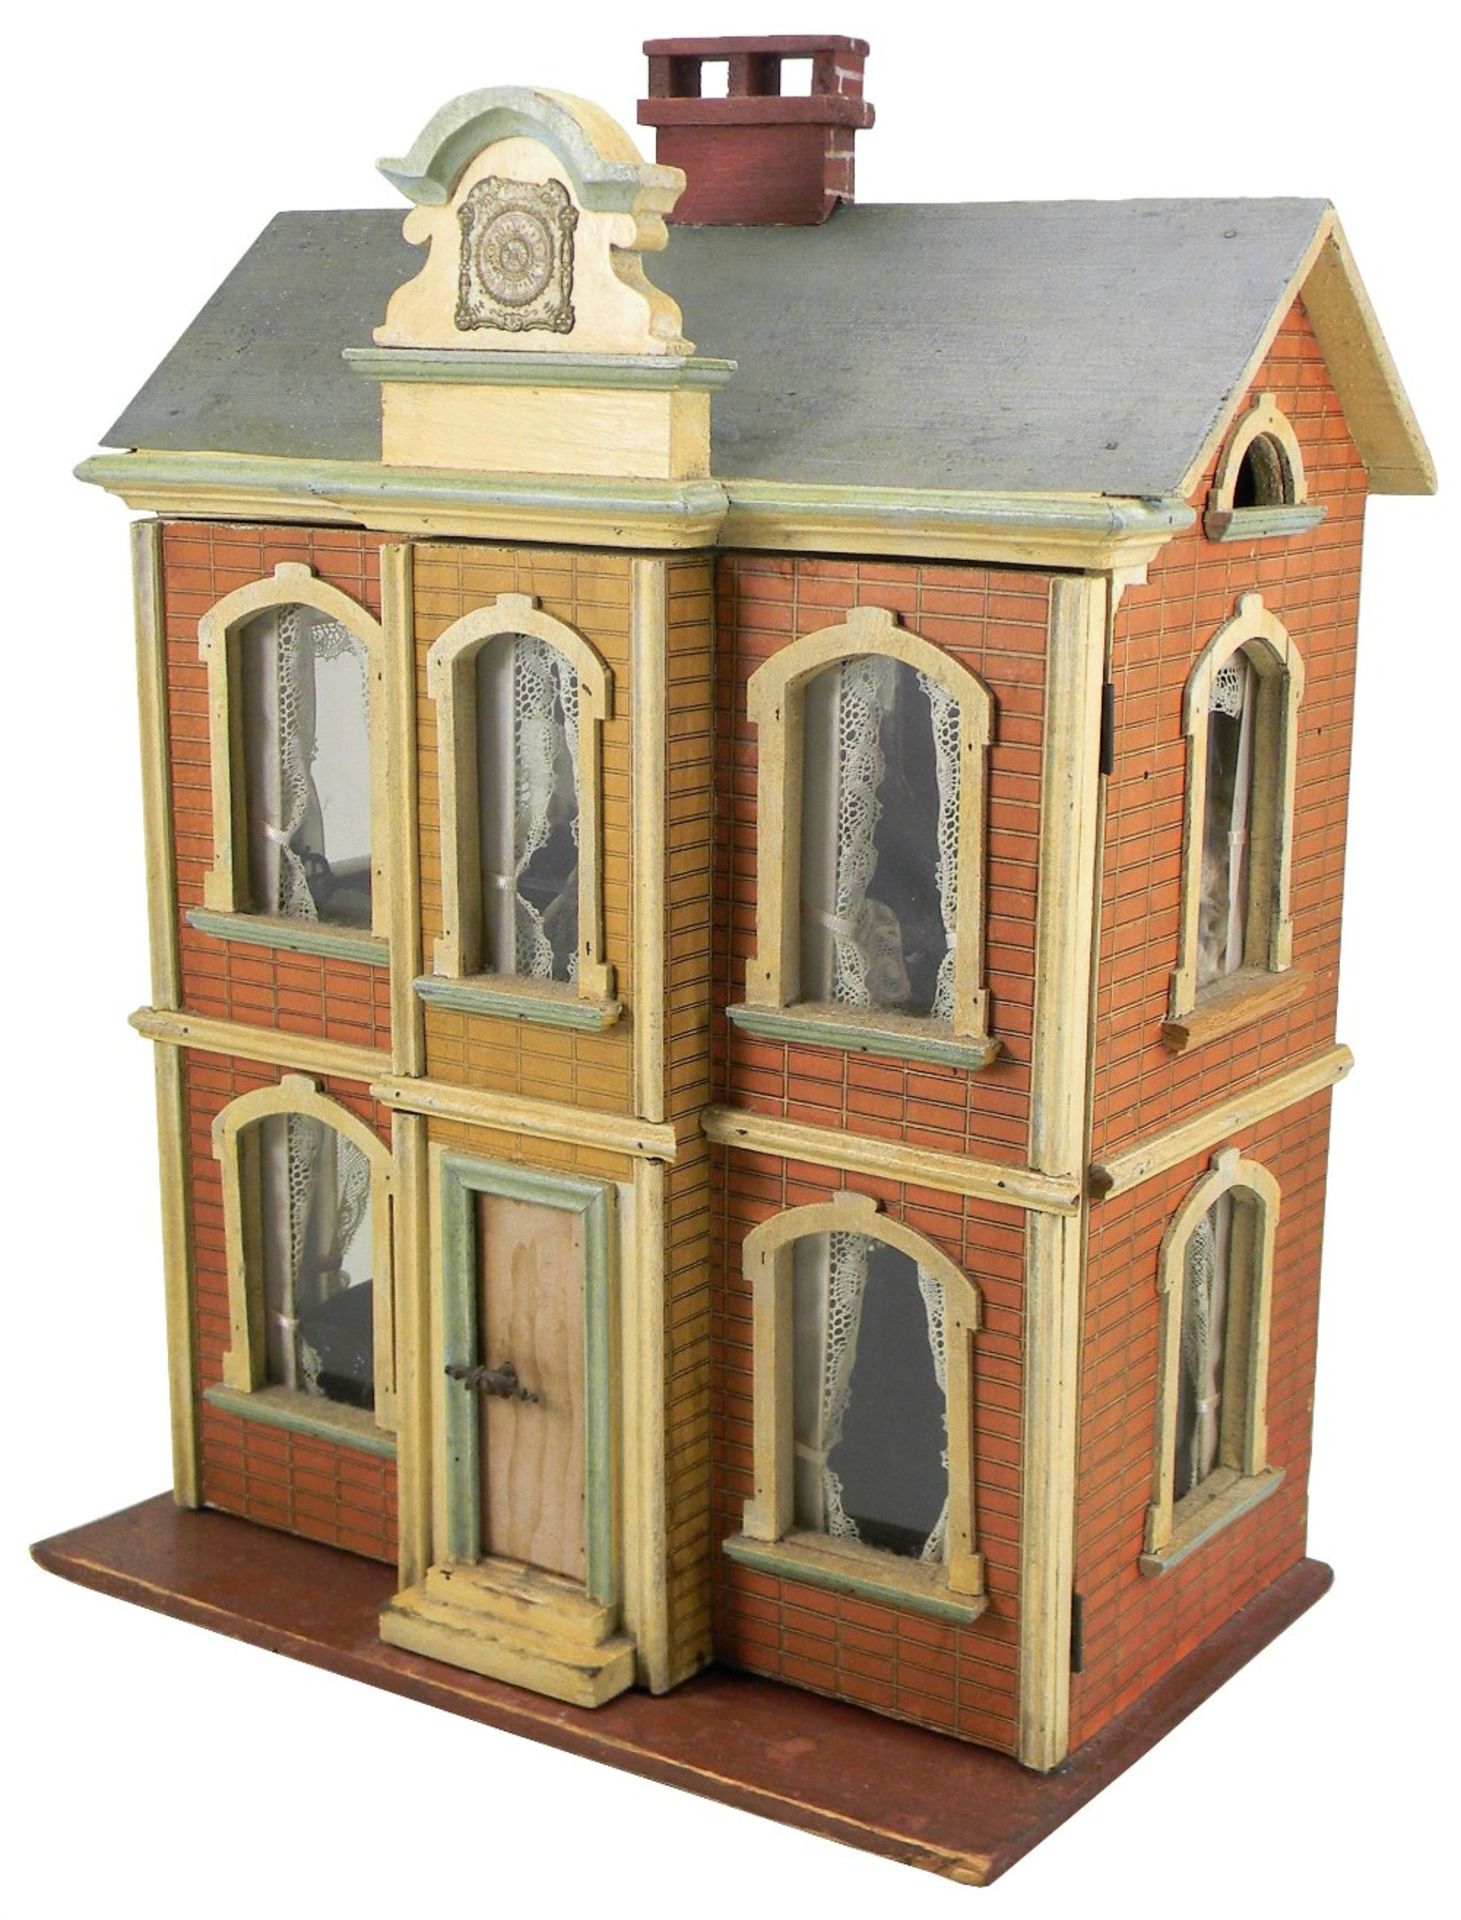 Small Moritz Gottschalk Model 10, painted wooden blue roof dolls house with contents, German for the